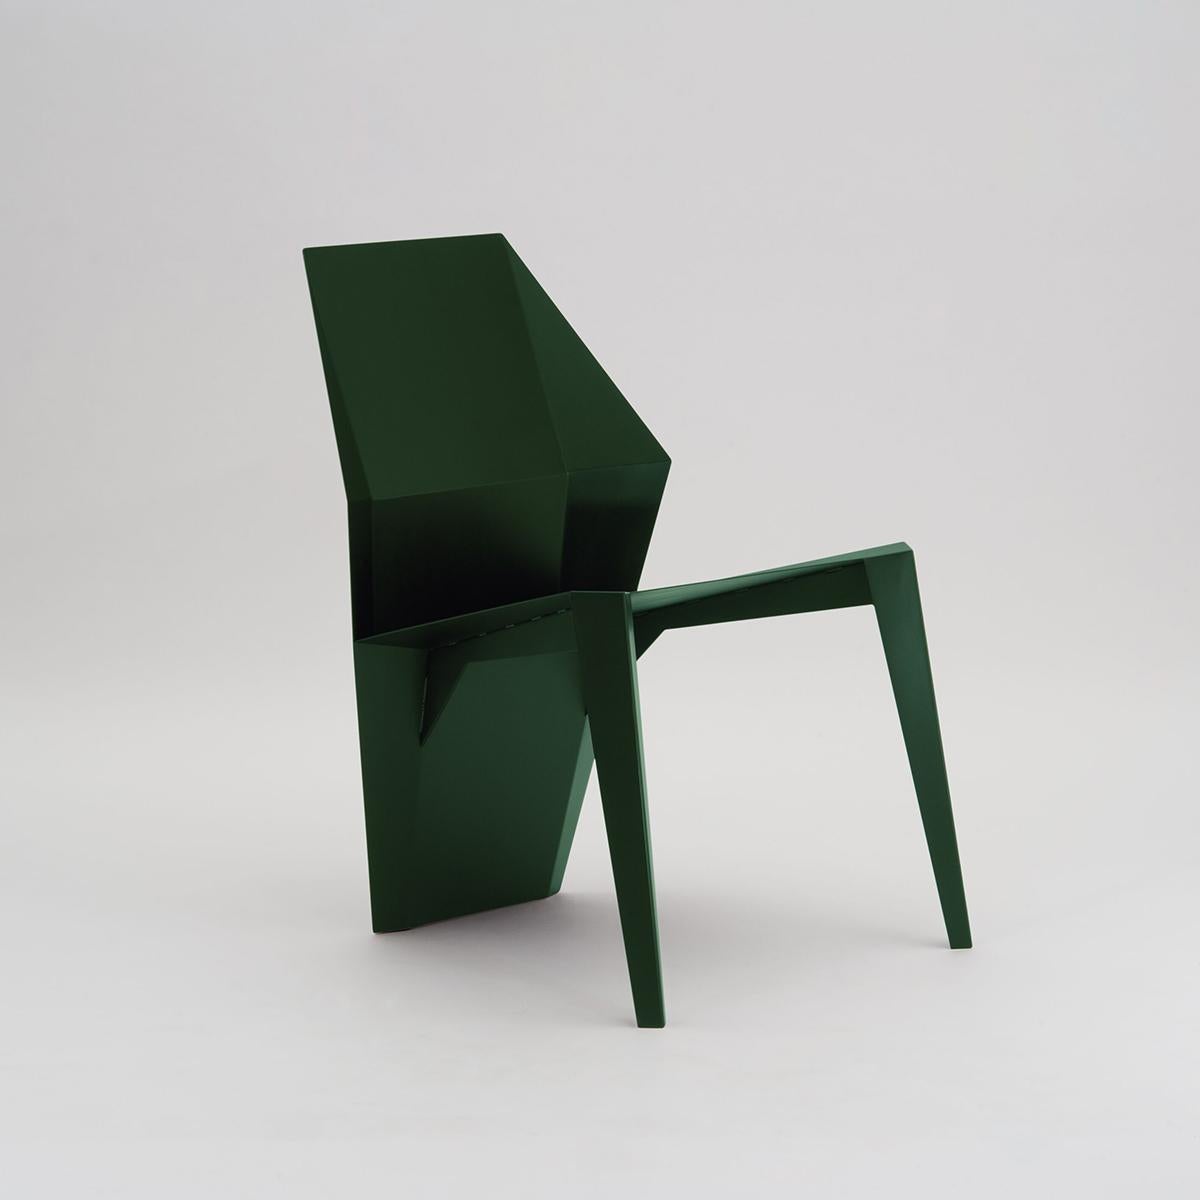 Stainless Steel Centaurus Sculptural Chair with soft-touch powder coated finish